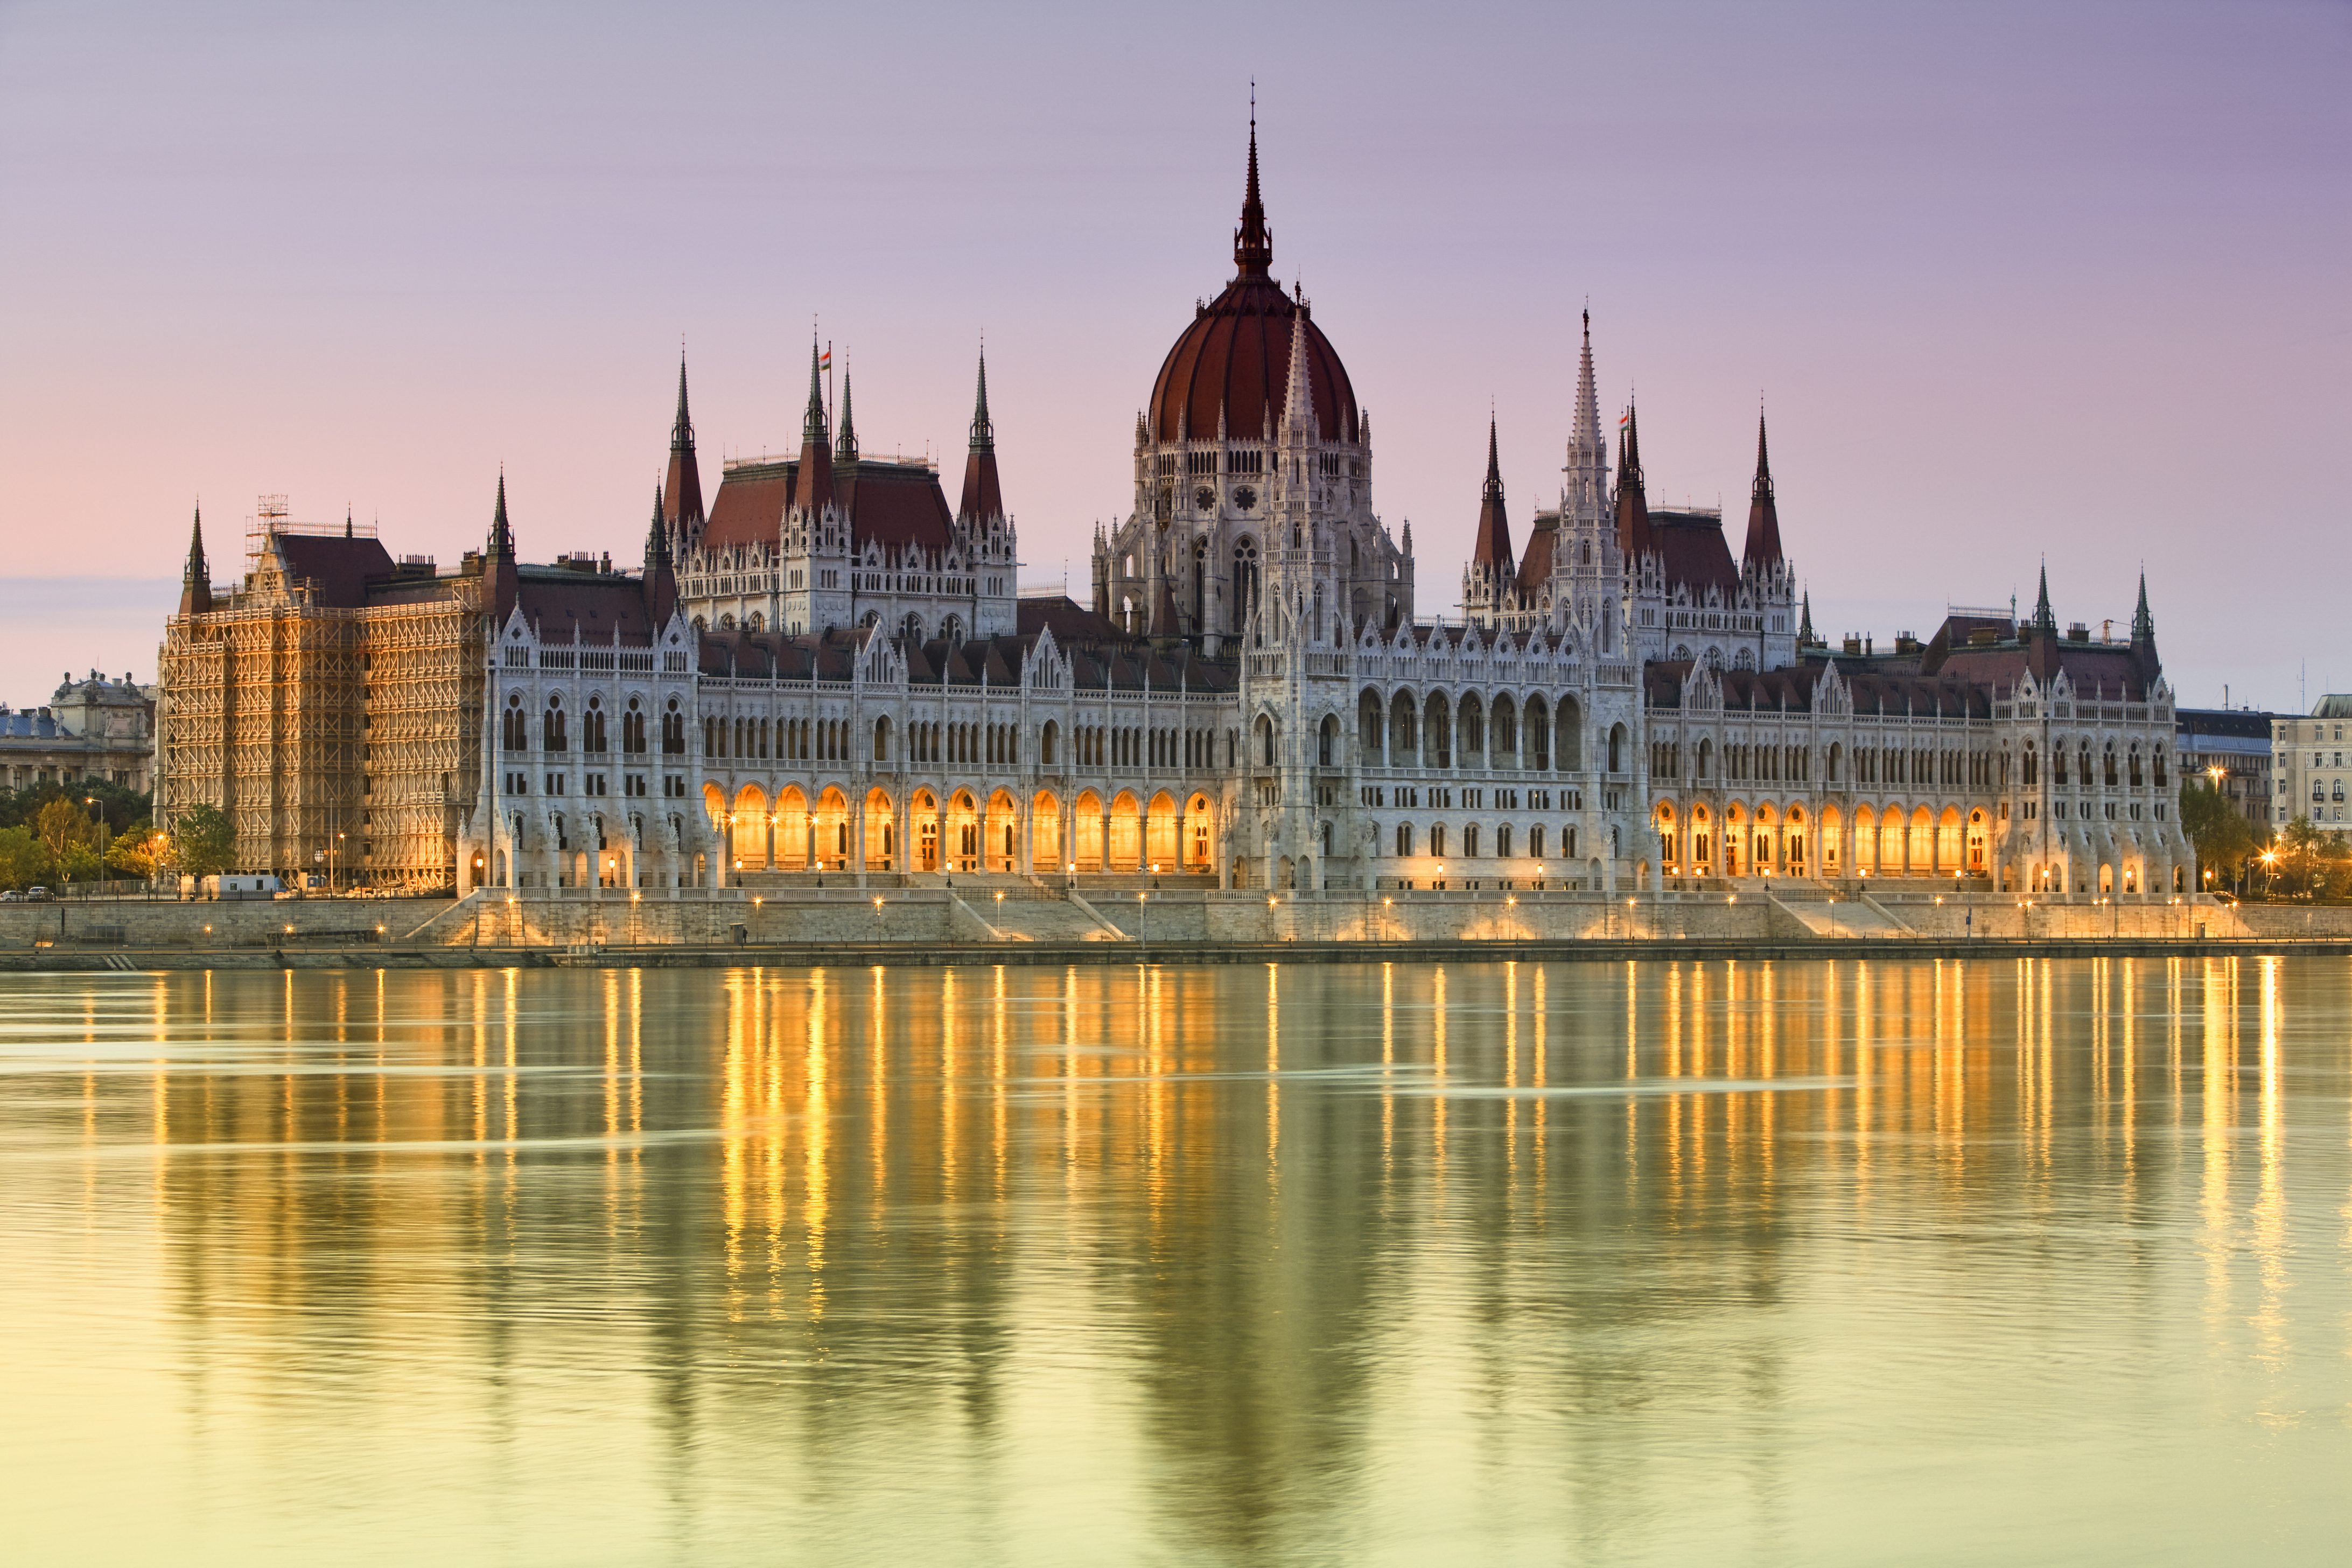 HE HUNGARIAN  PARLIAMENT  BUILDING  IS THE SEAT OF THE 